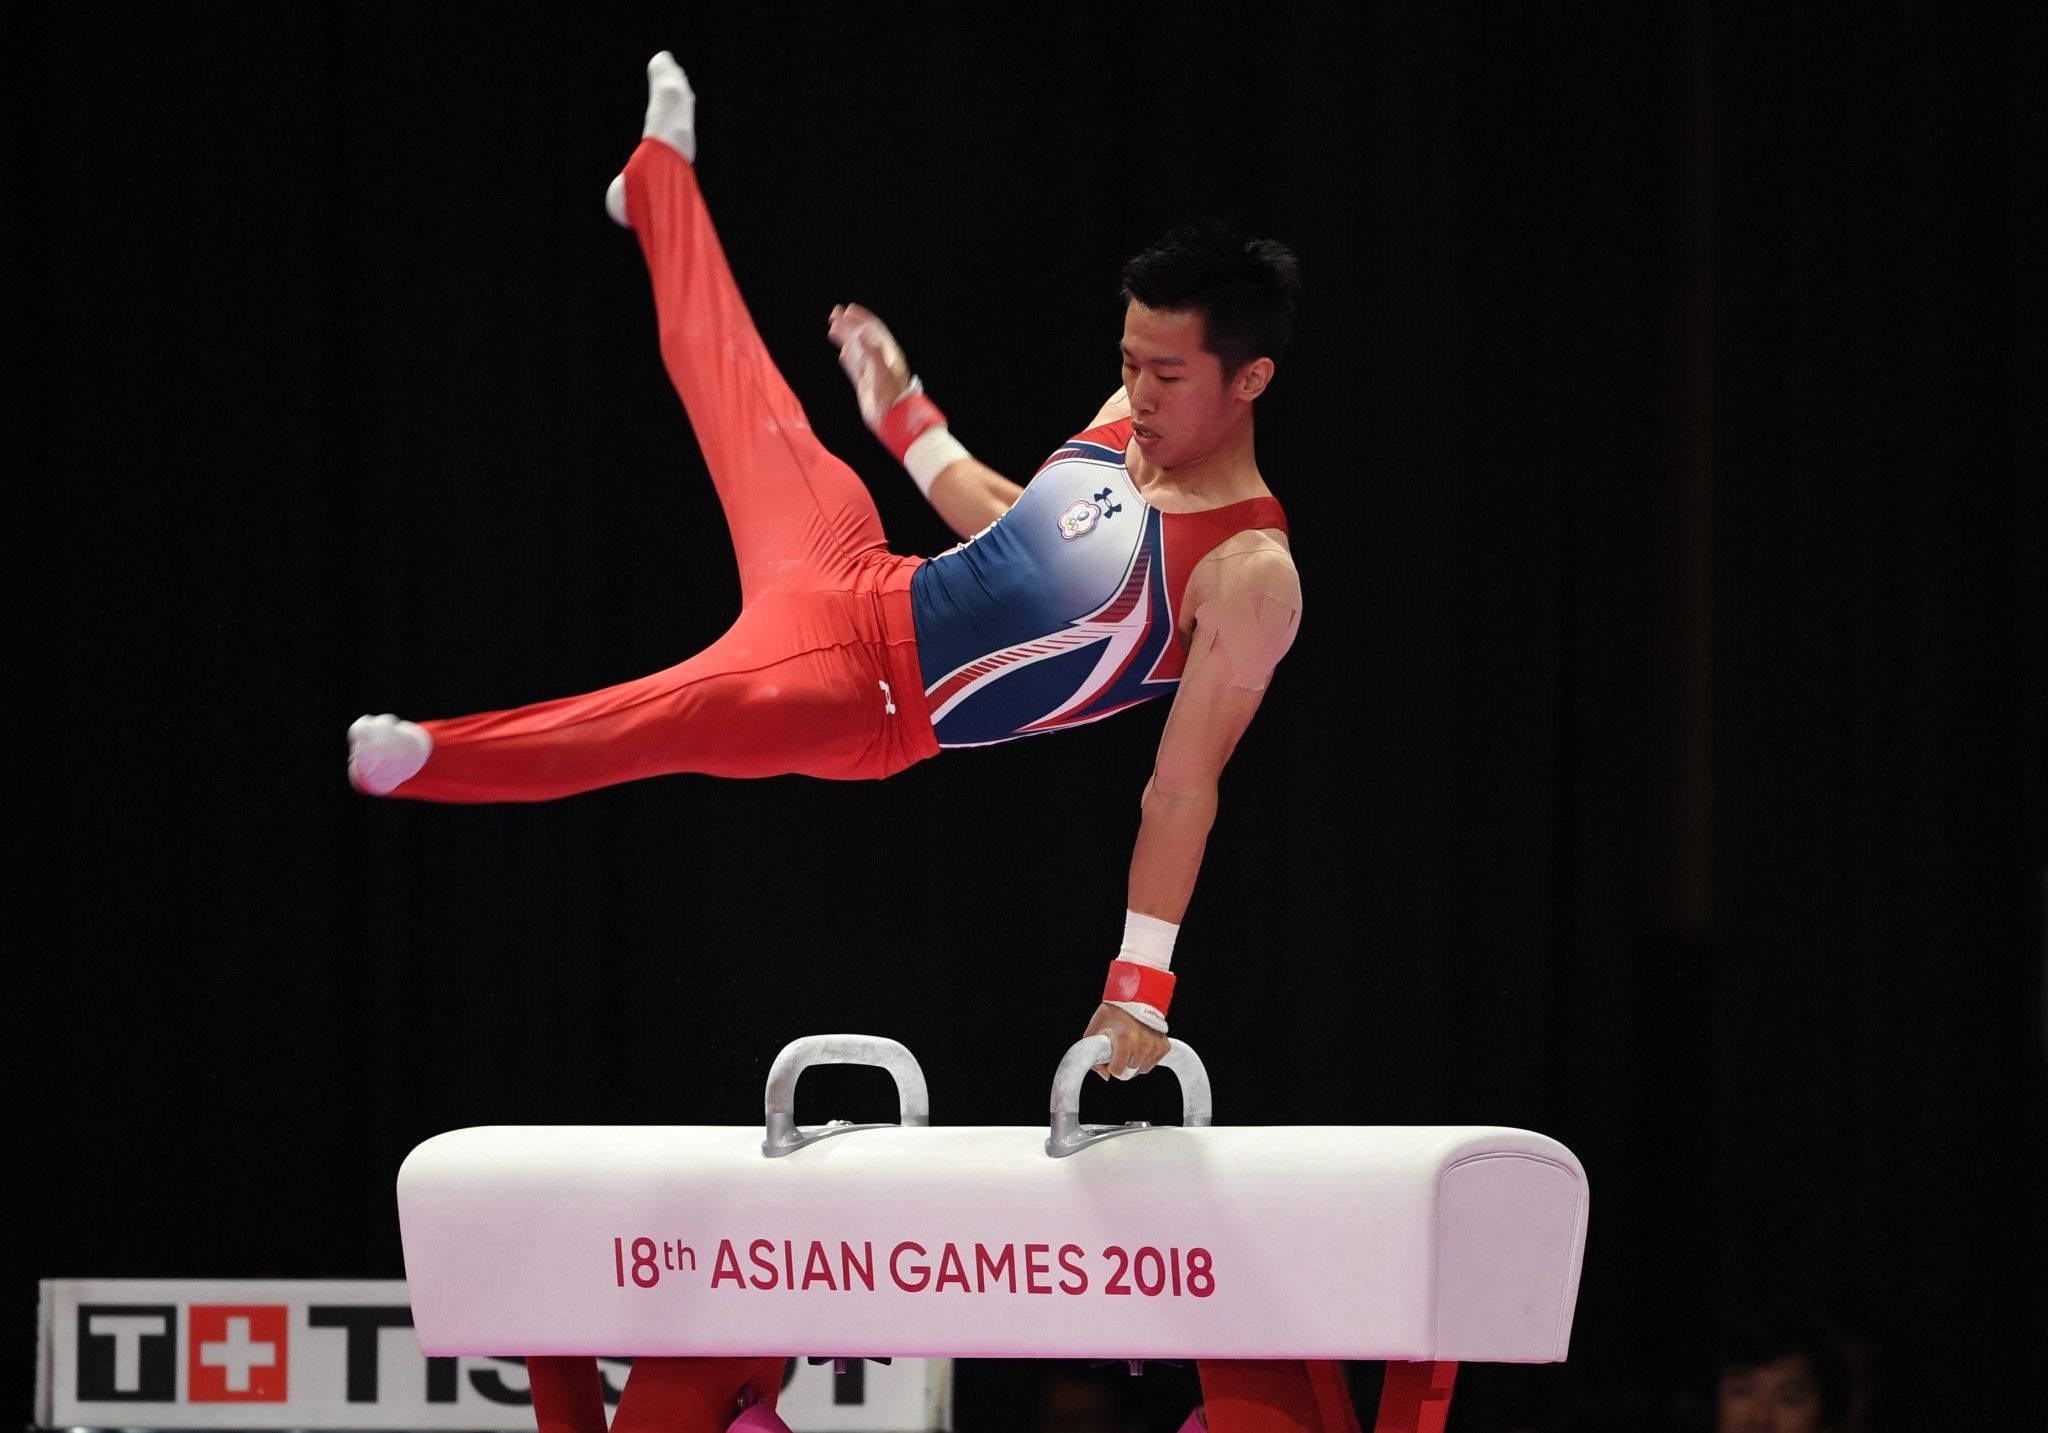 Pommel Horse (Gymnastics): 18th Asian Games, 2018, Chih Kai Lee, Chinese Taipei, First gold. 2050x1440 HD Wallpaper.